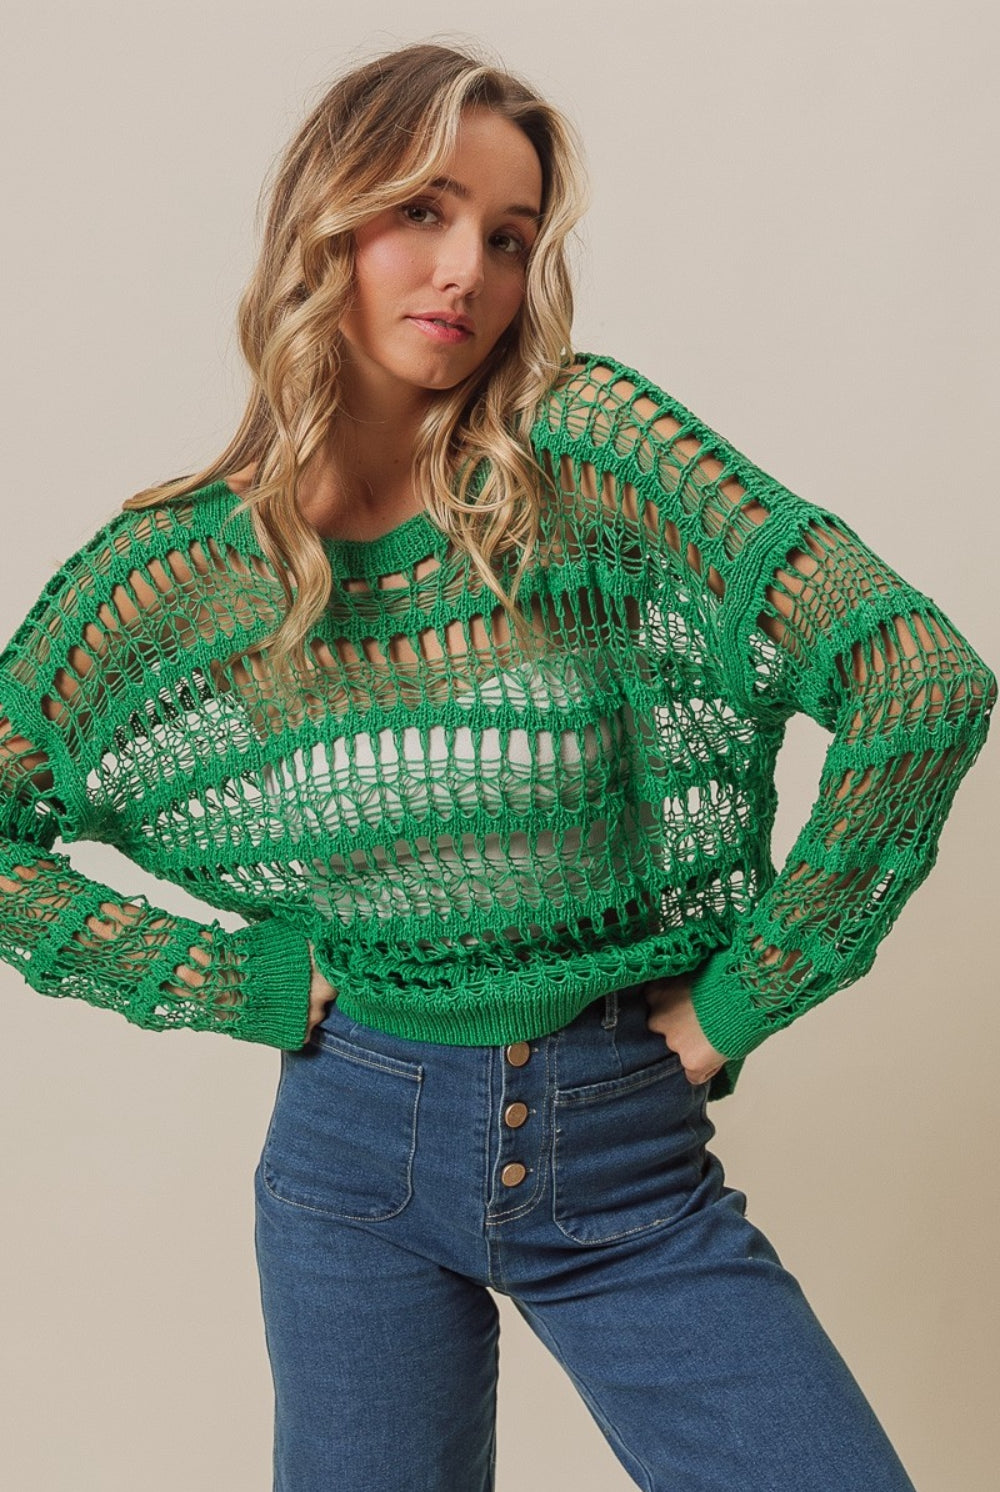 Woman modeling a green long sleeve crochet knit cover up